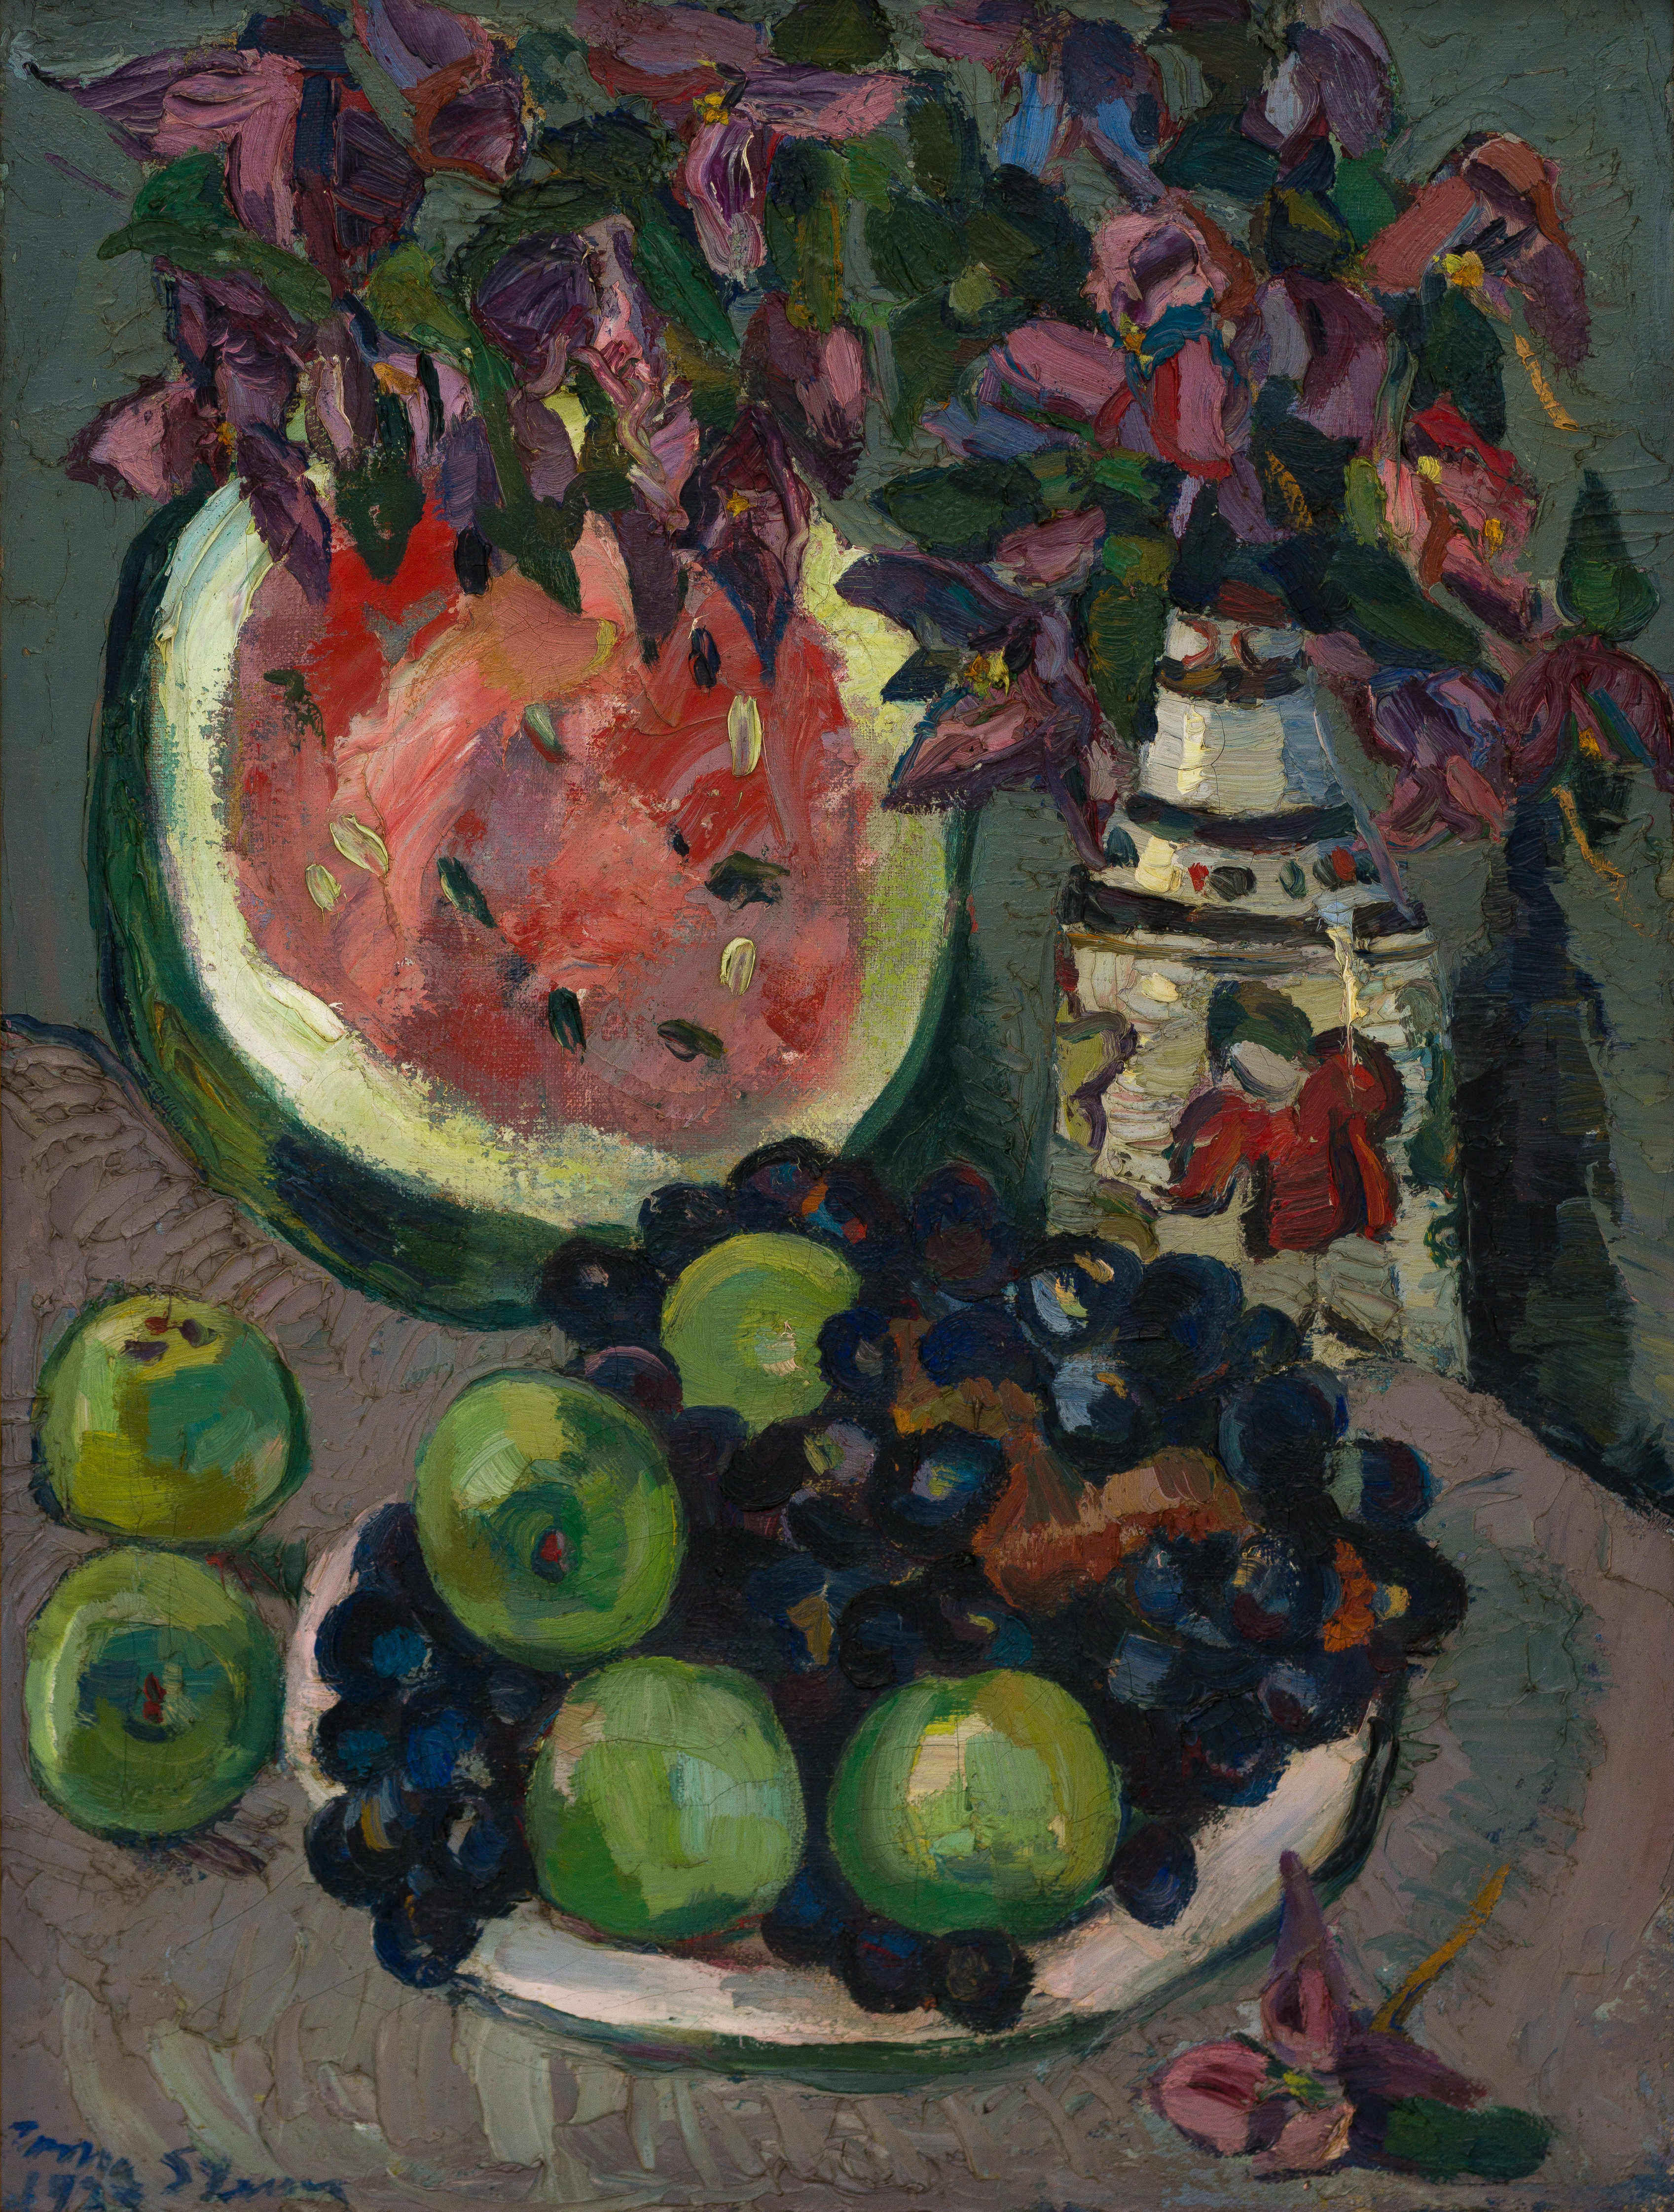 Irma Stern; Still Life with Watermelon, Flowers and Grapes